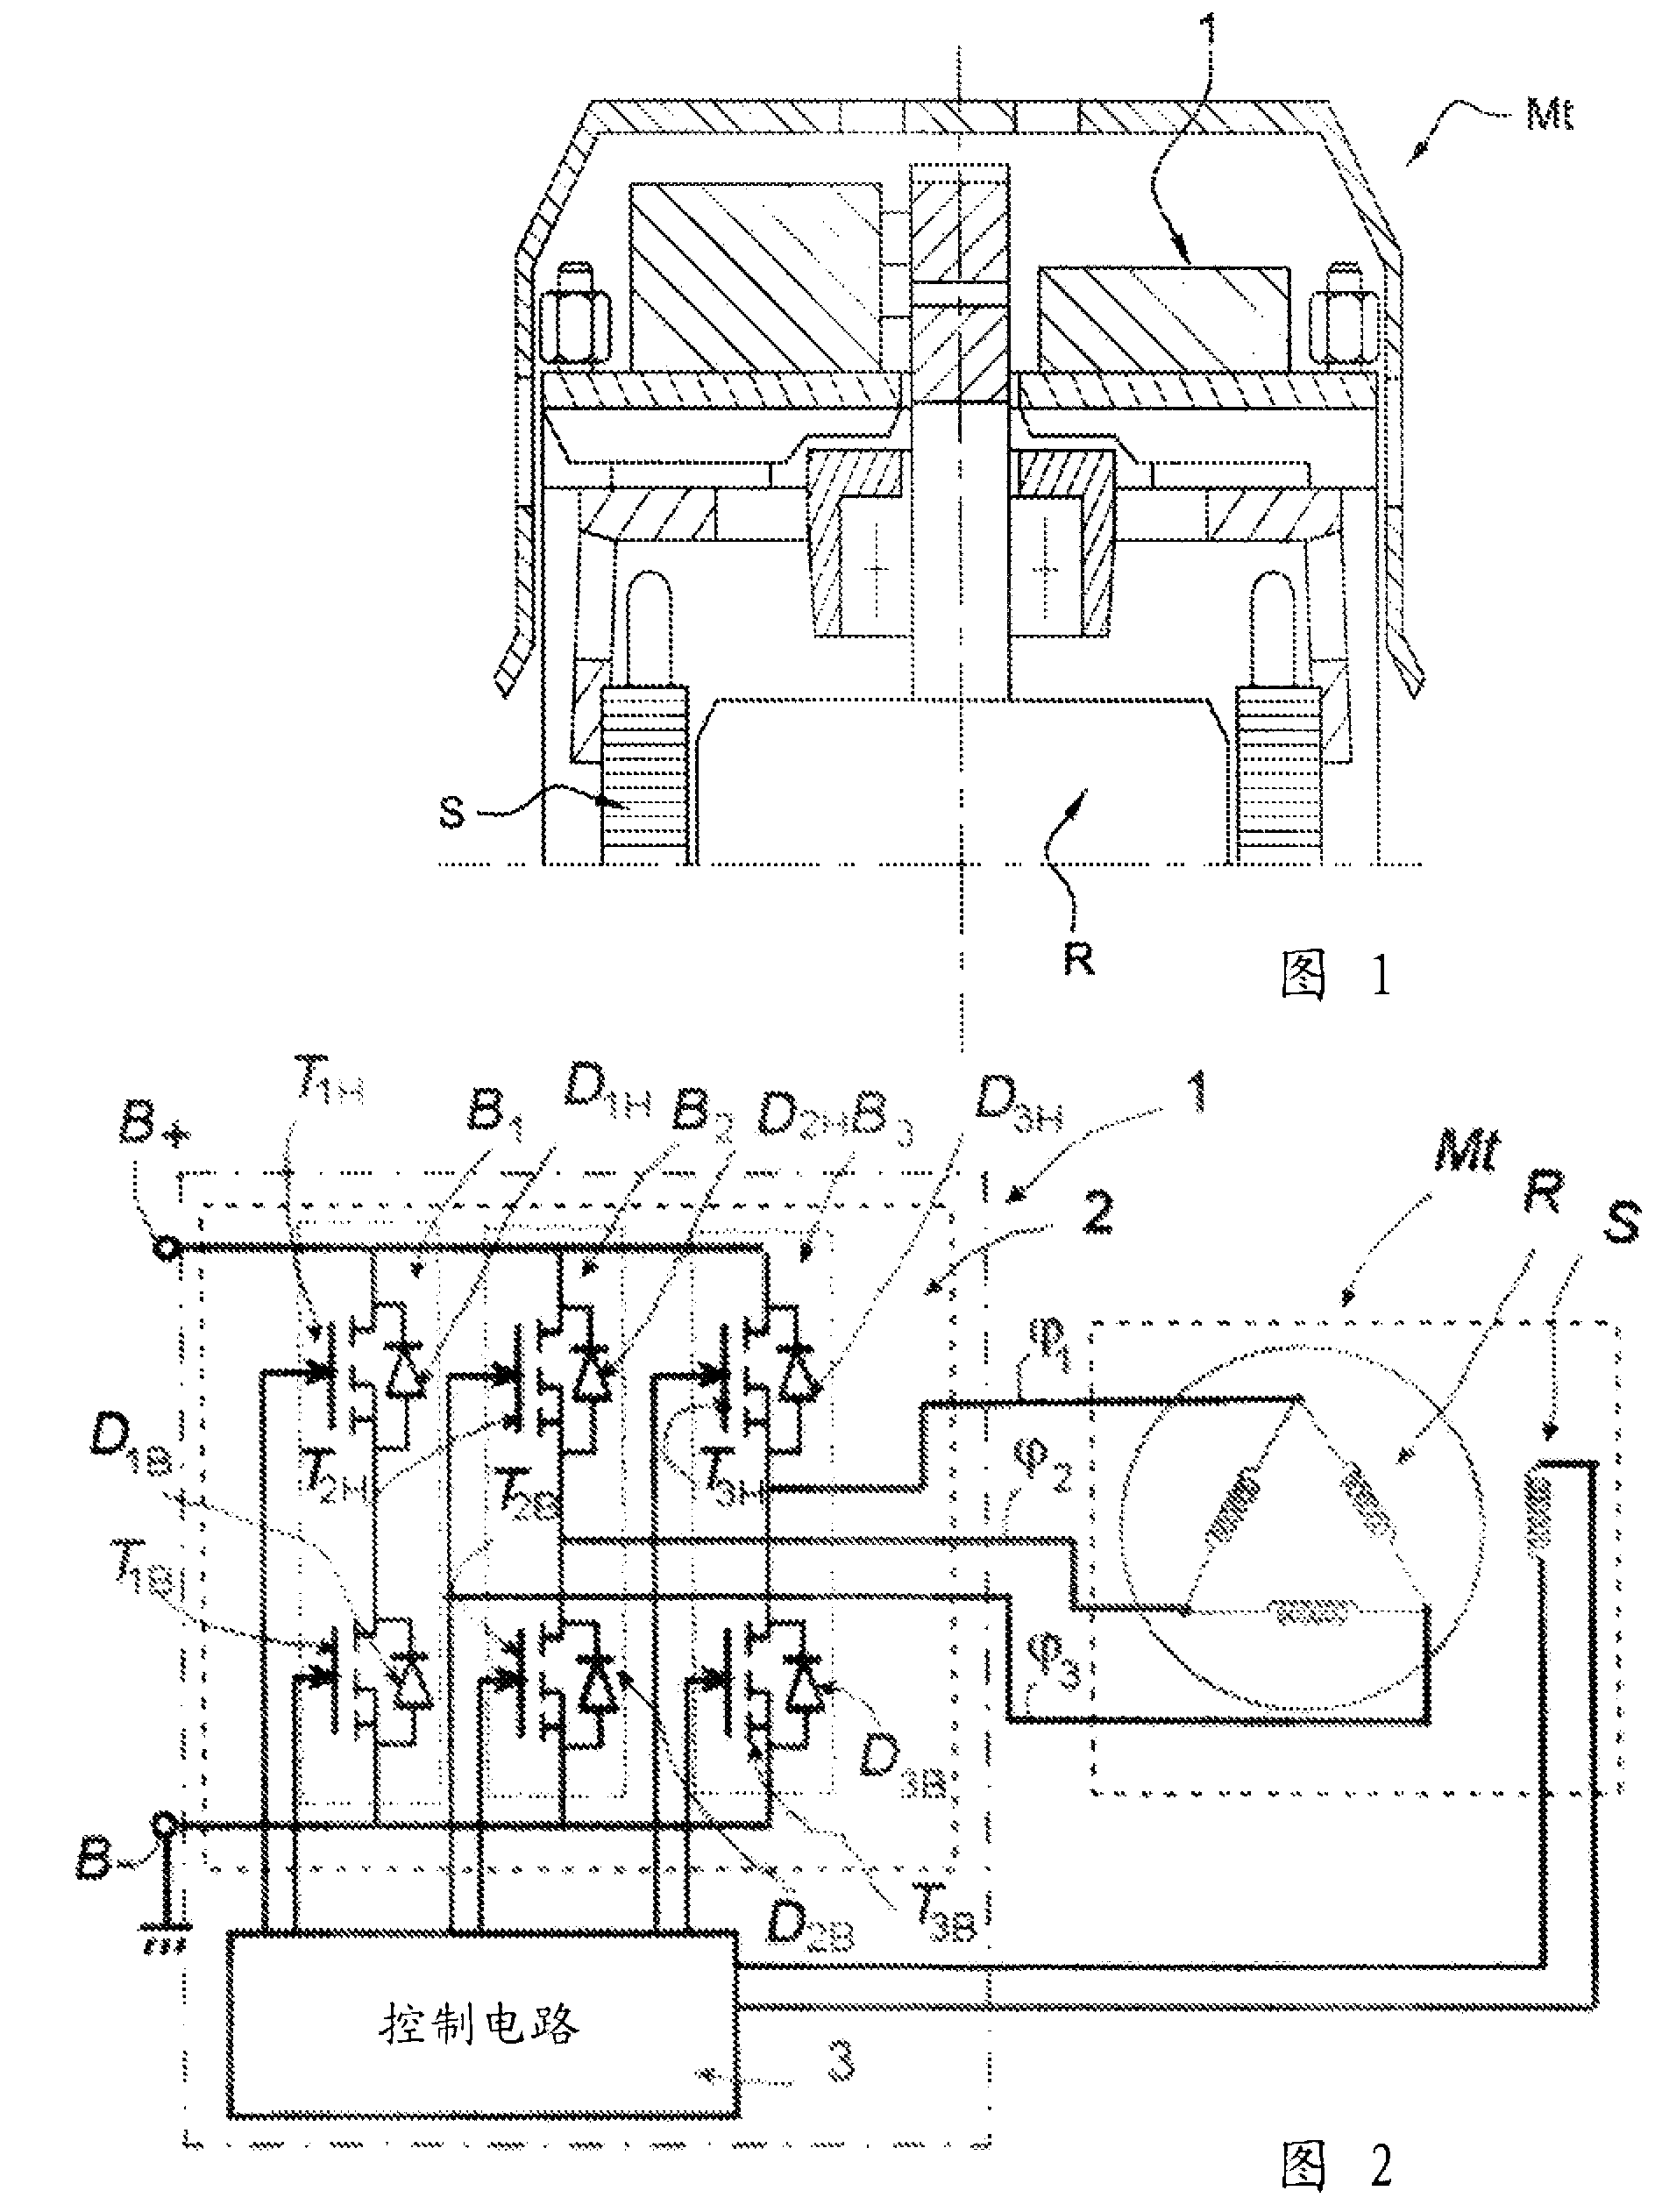 Method for interconnecting electronic power modules of a rotary electric machine and assembly of interconnected power modules obtained using said method